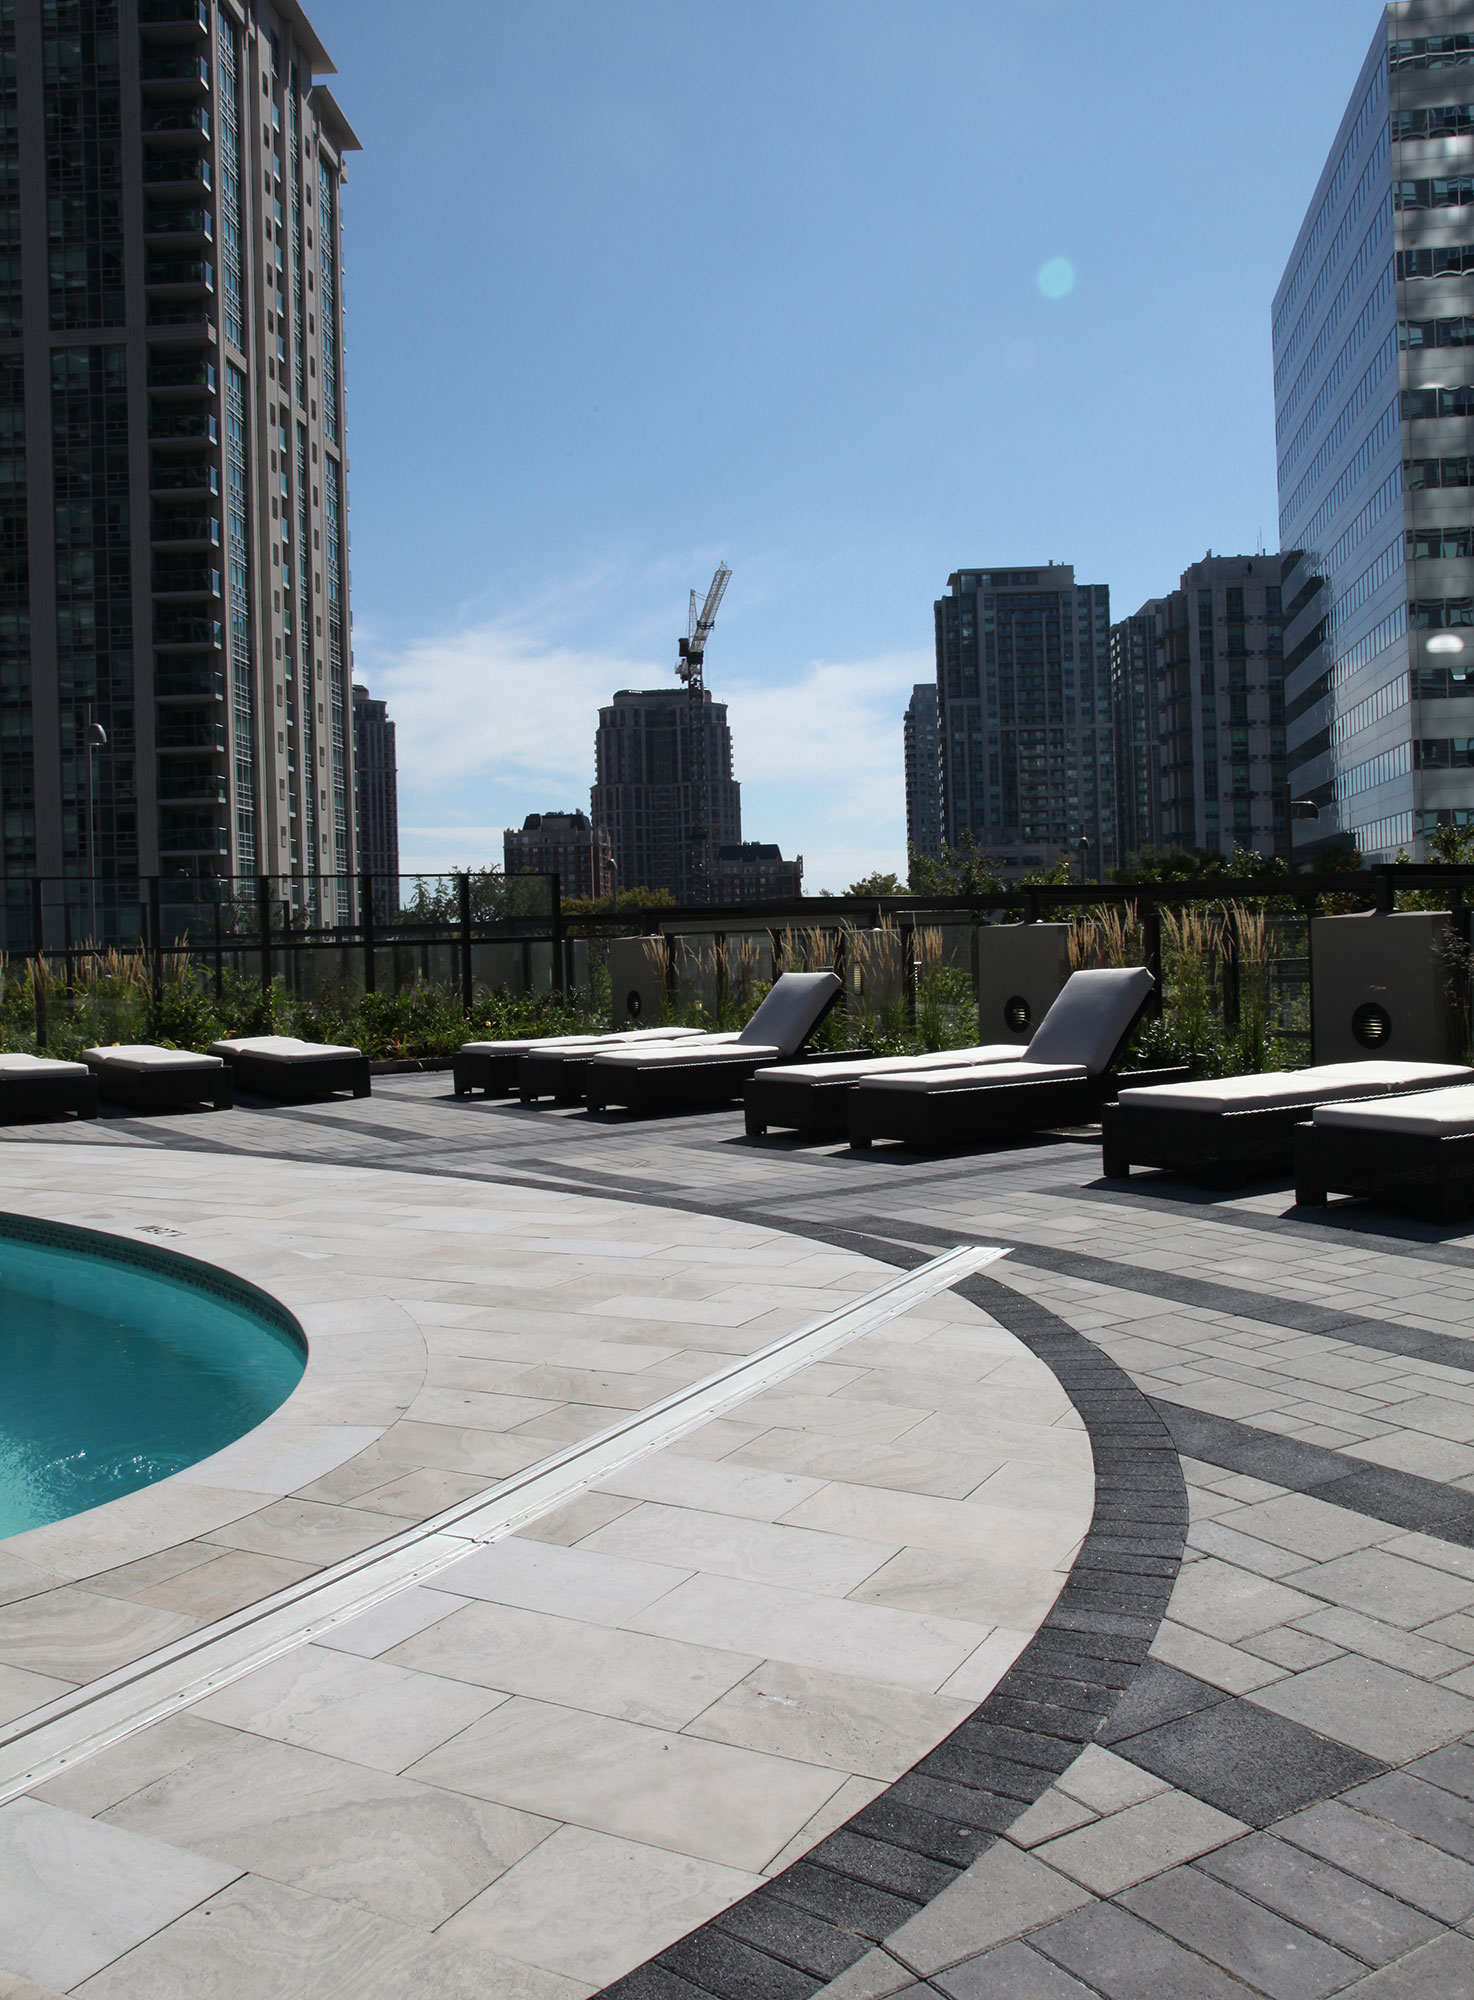 Lounge chairs wrap around the roof deck pool overlooking the cityscape, next to patterned paver rug of grey Series and black Europaver.